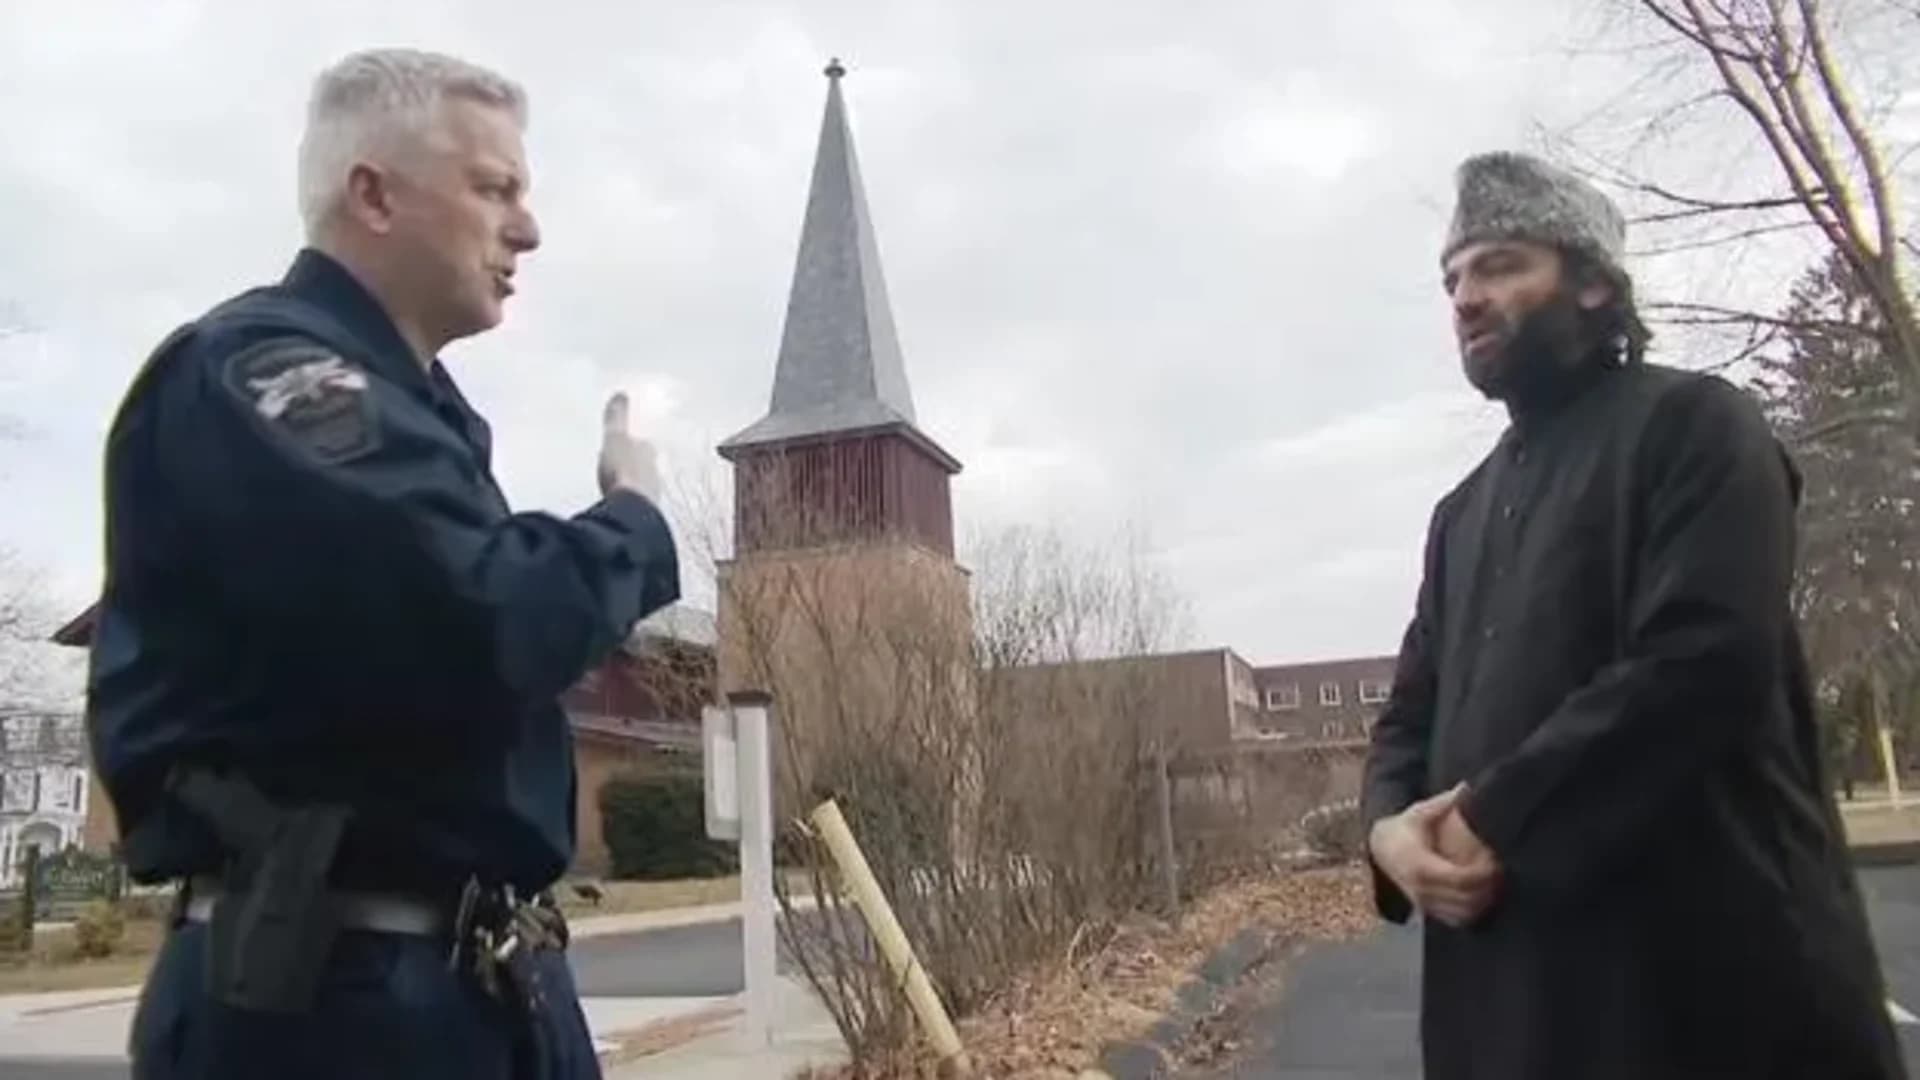 Norwalk police provide extra security at mosque, houses of worship